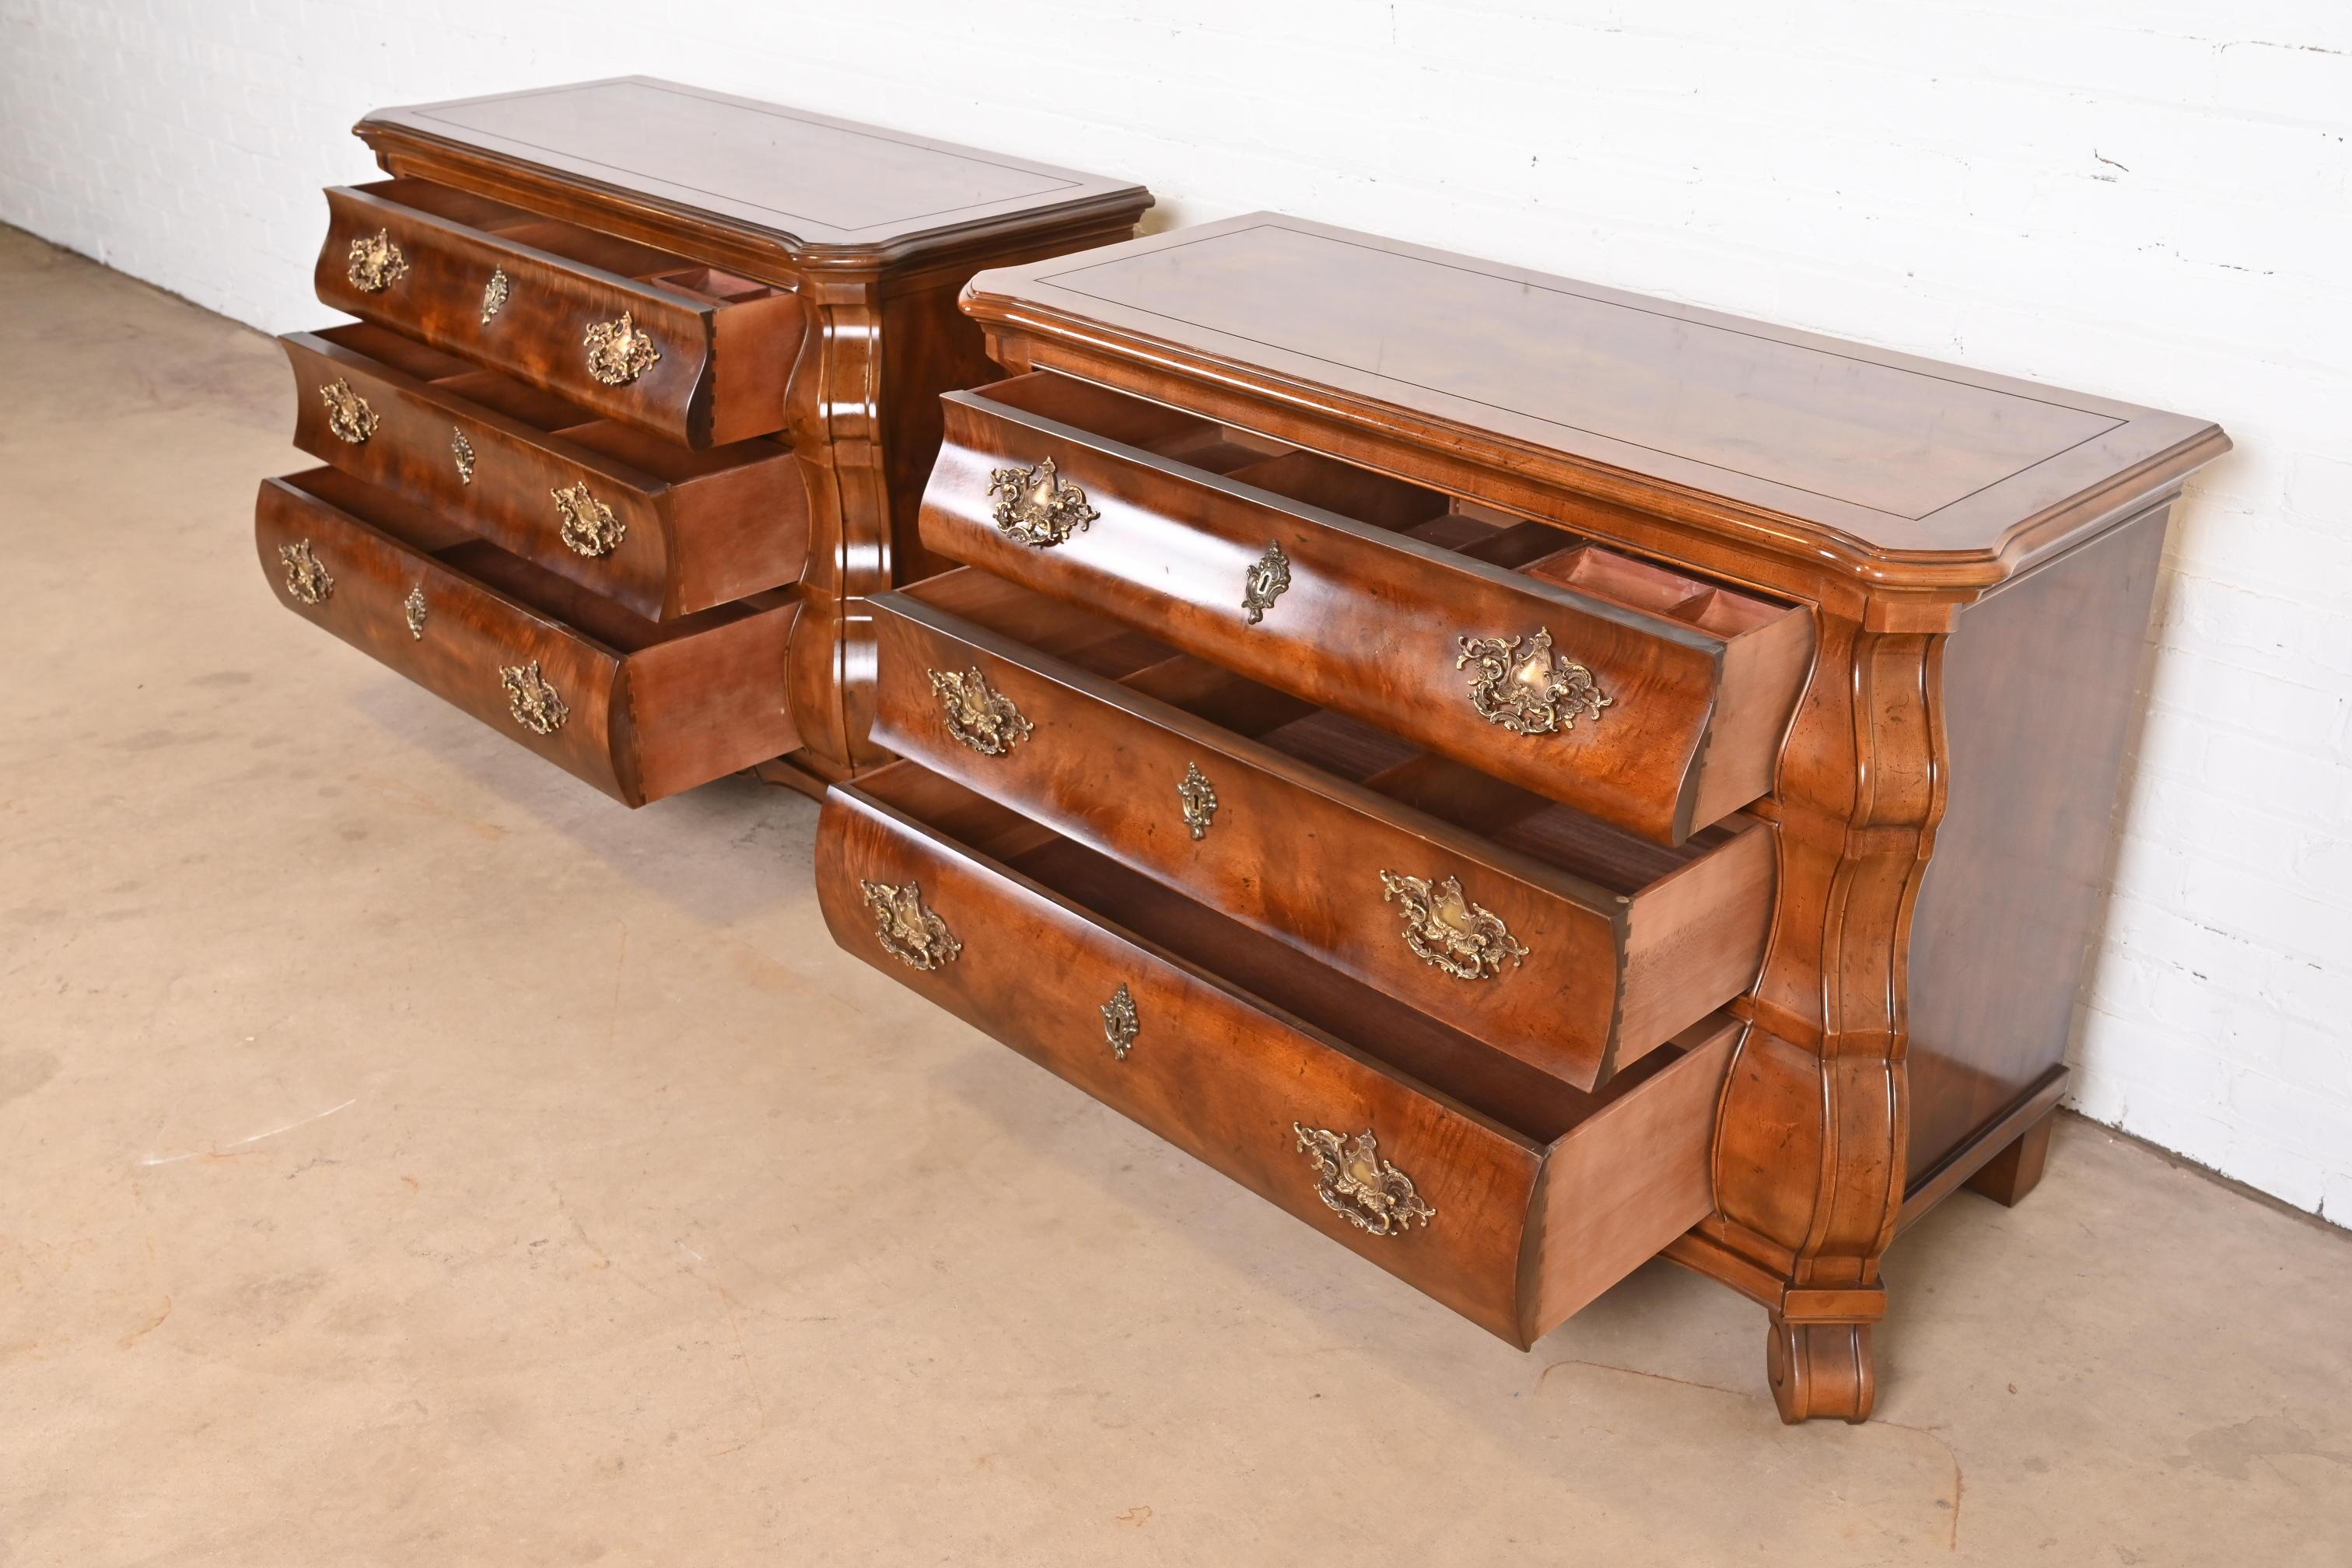 Henredon Italian Baroque Burled Mahogany Bombay Chests or Commodes, Pair For Sale 4